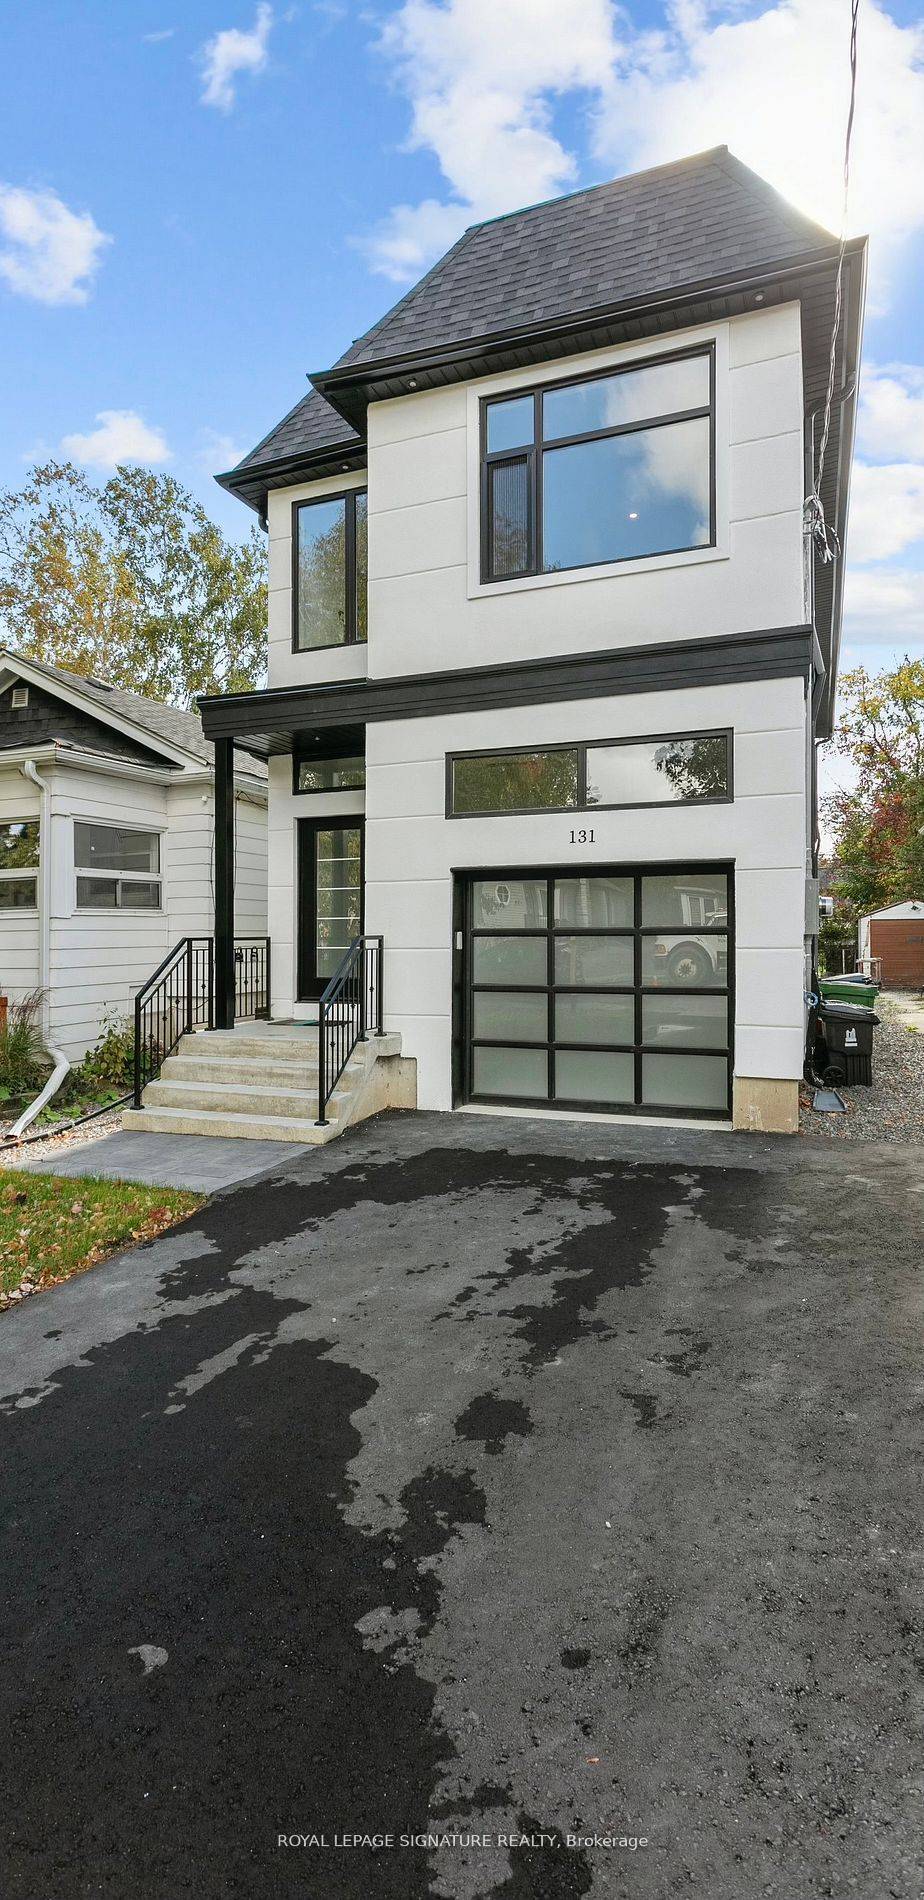 Brand New Gorgeous 3 1 Bedroom, 4 Bathroom Home Within The Desirable Mimico Location.